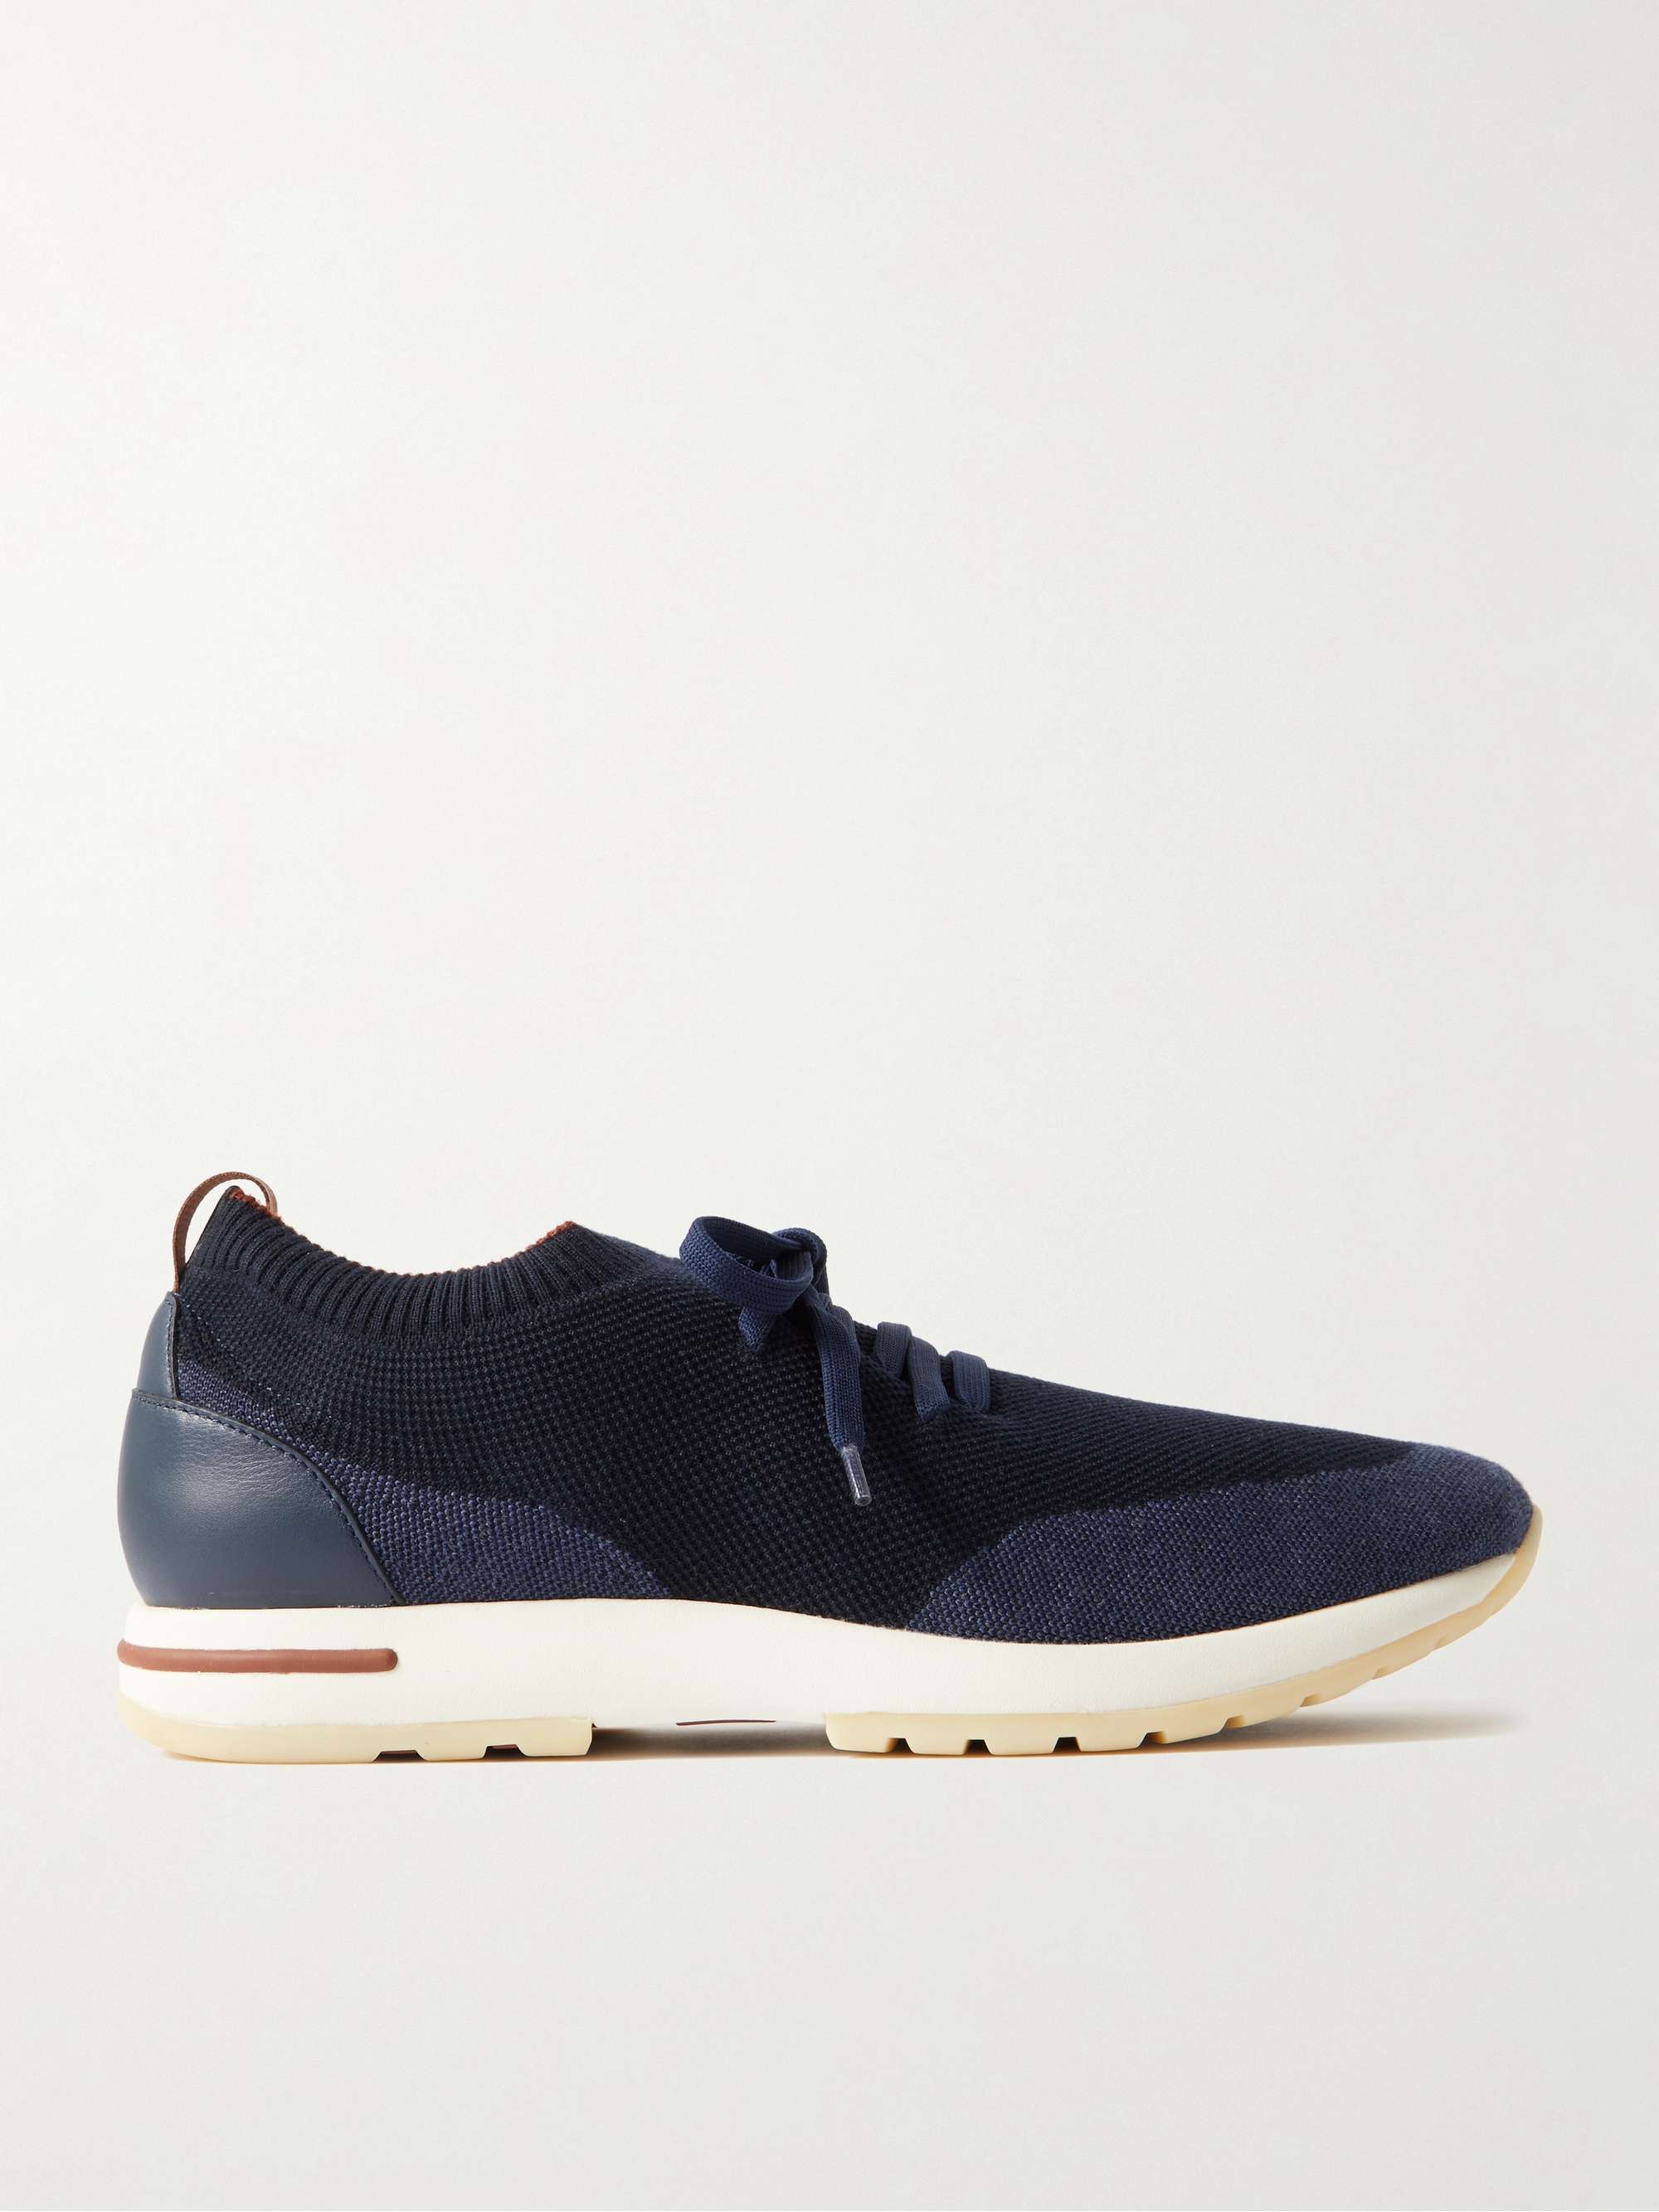 LORO PIANA 360 Flexy Walk Leather-Trimmed Knitted Wool Sneakers for Men |  MR PORTER